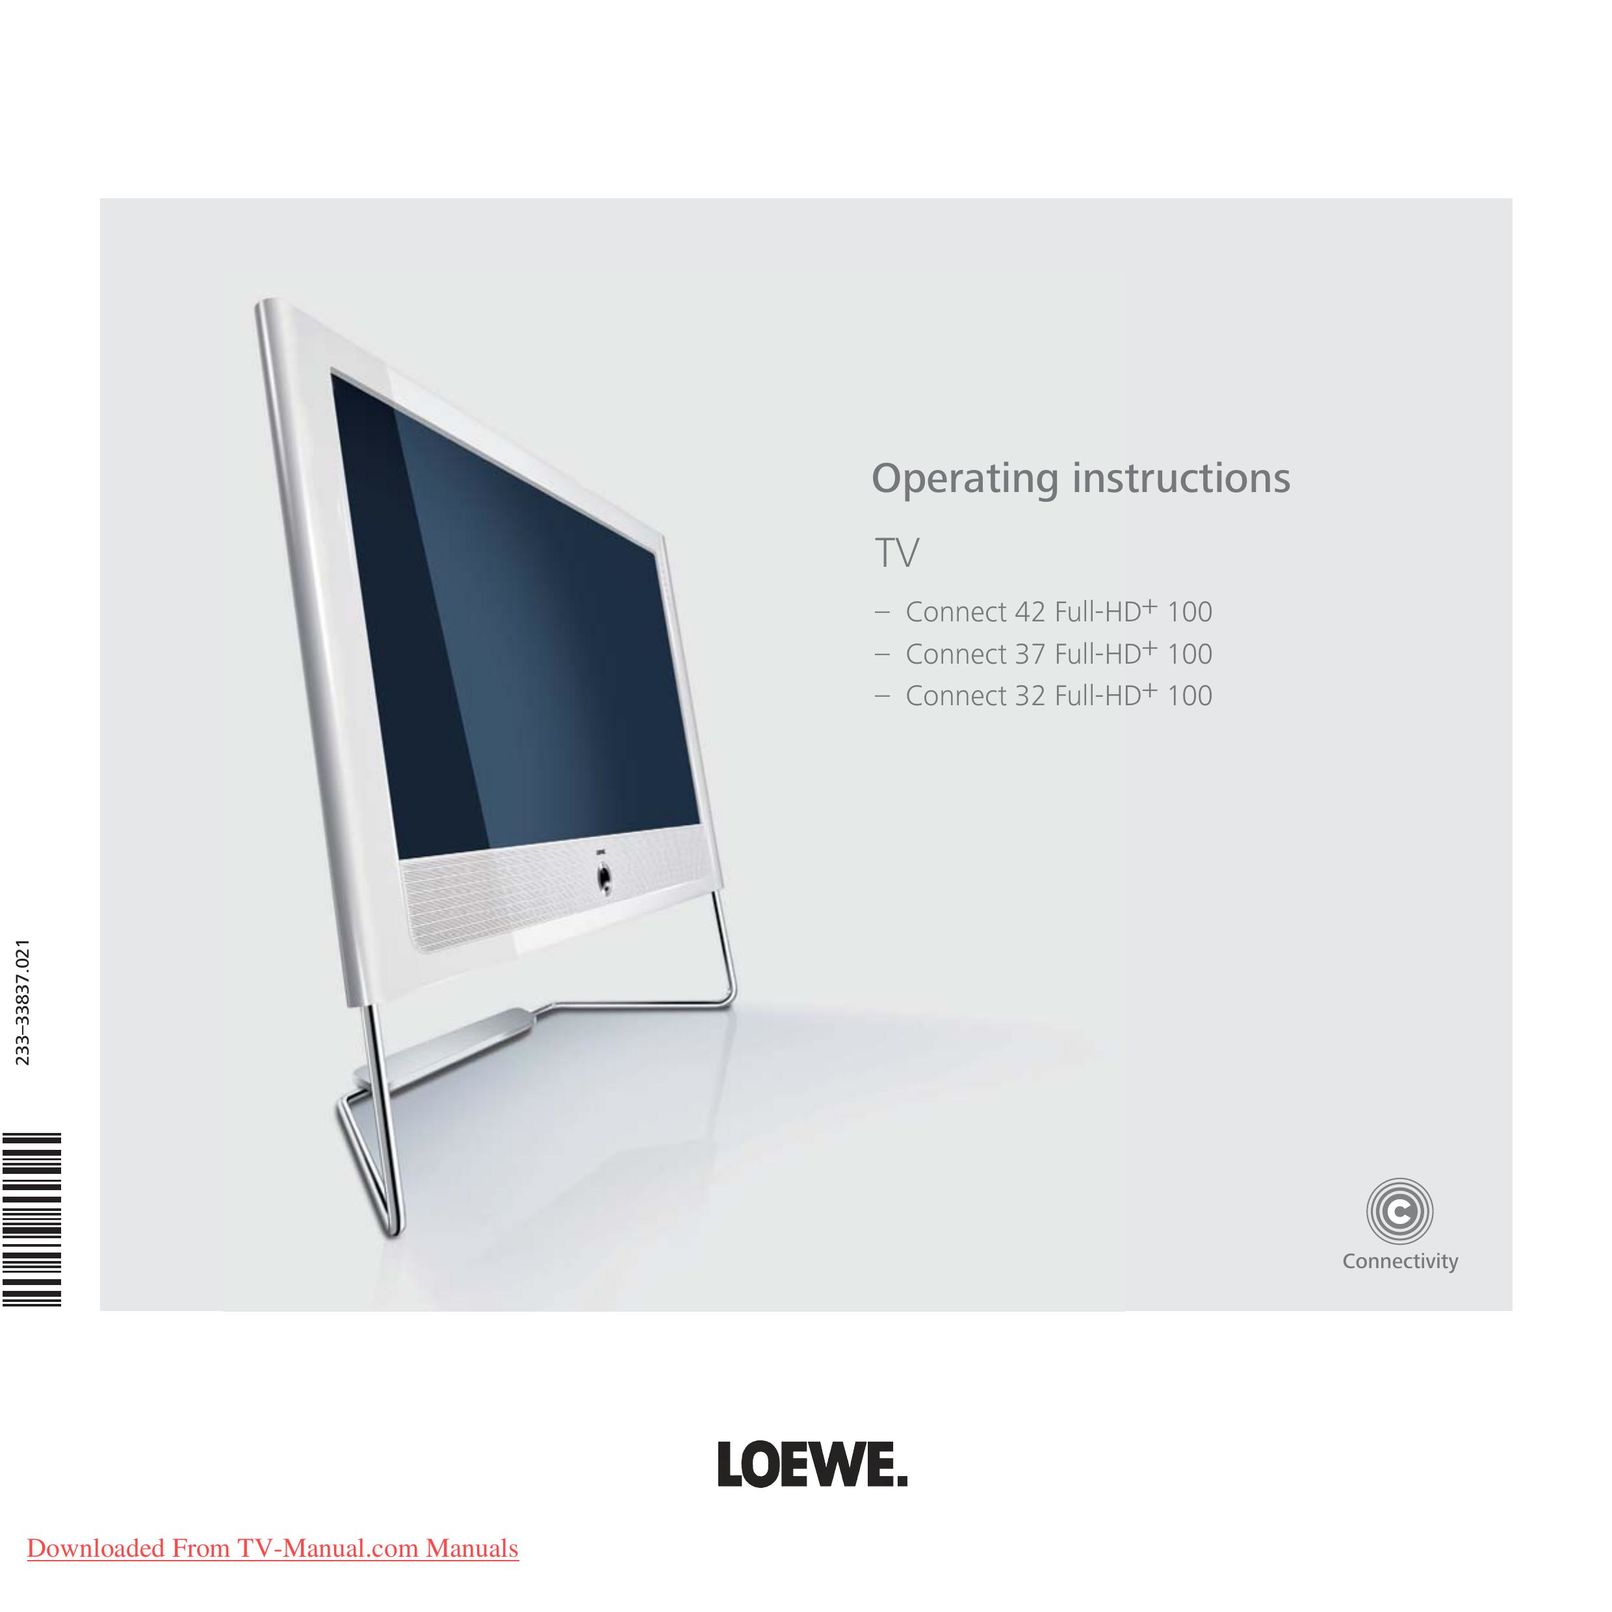 Loewe Connect 42 Full-HD+ 100 CRT Television User Manual